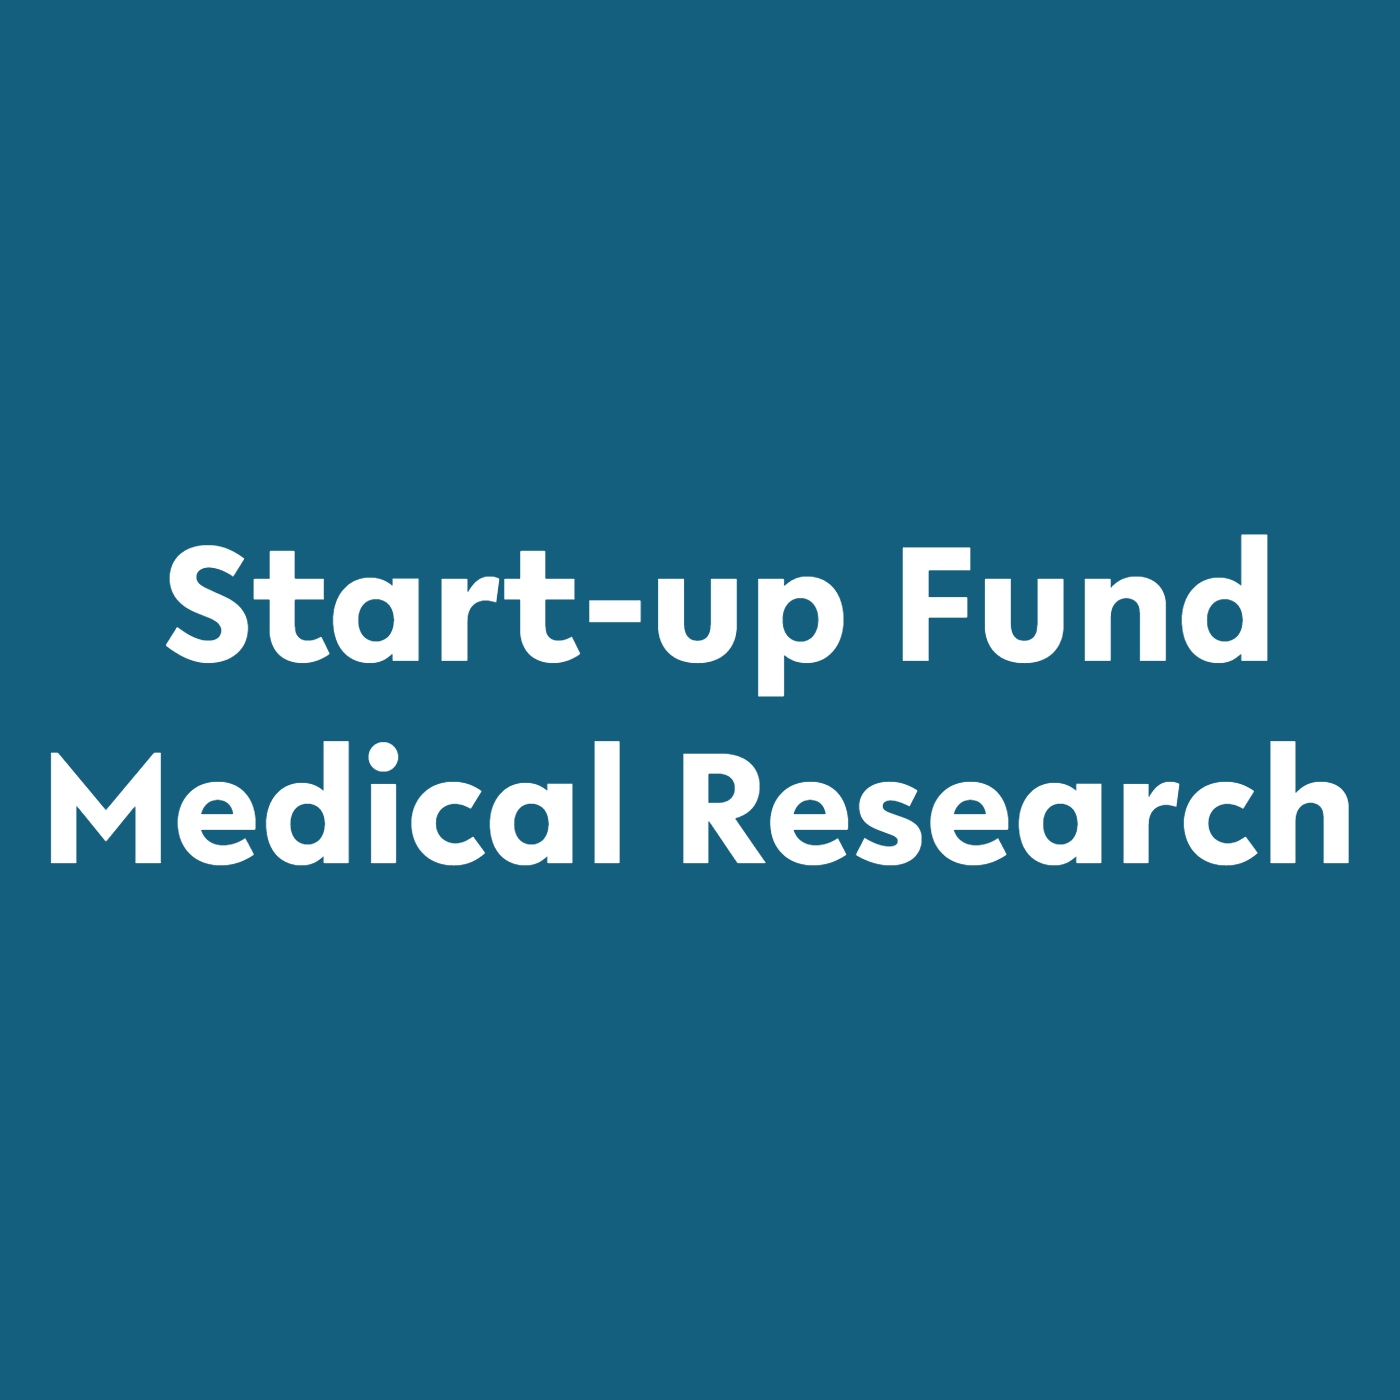 Blue box with text Start-up Fund Medical Research